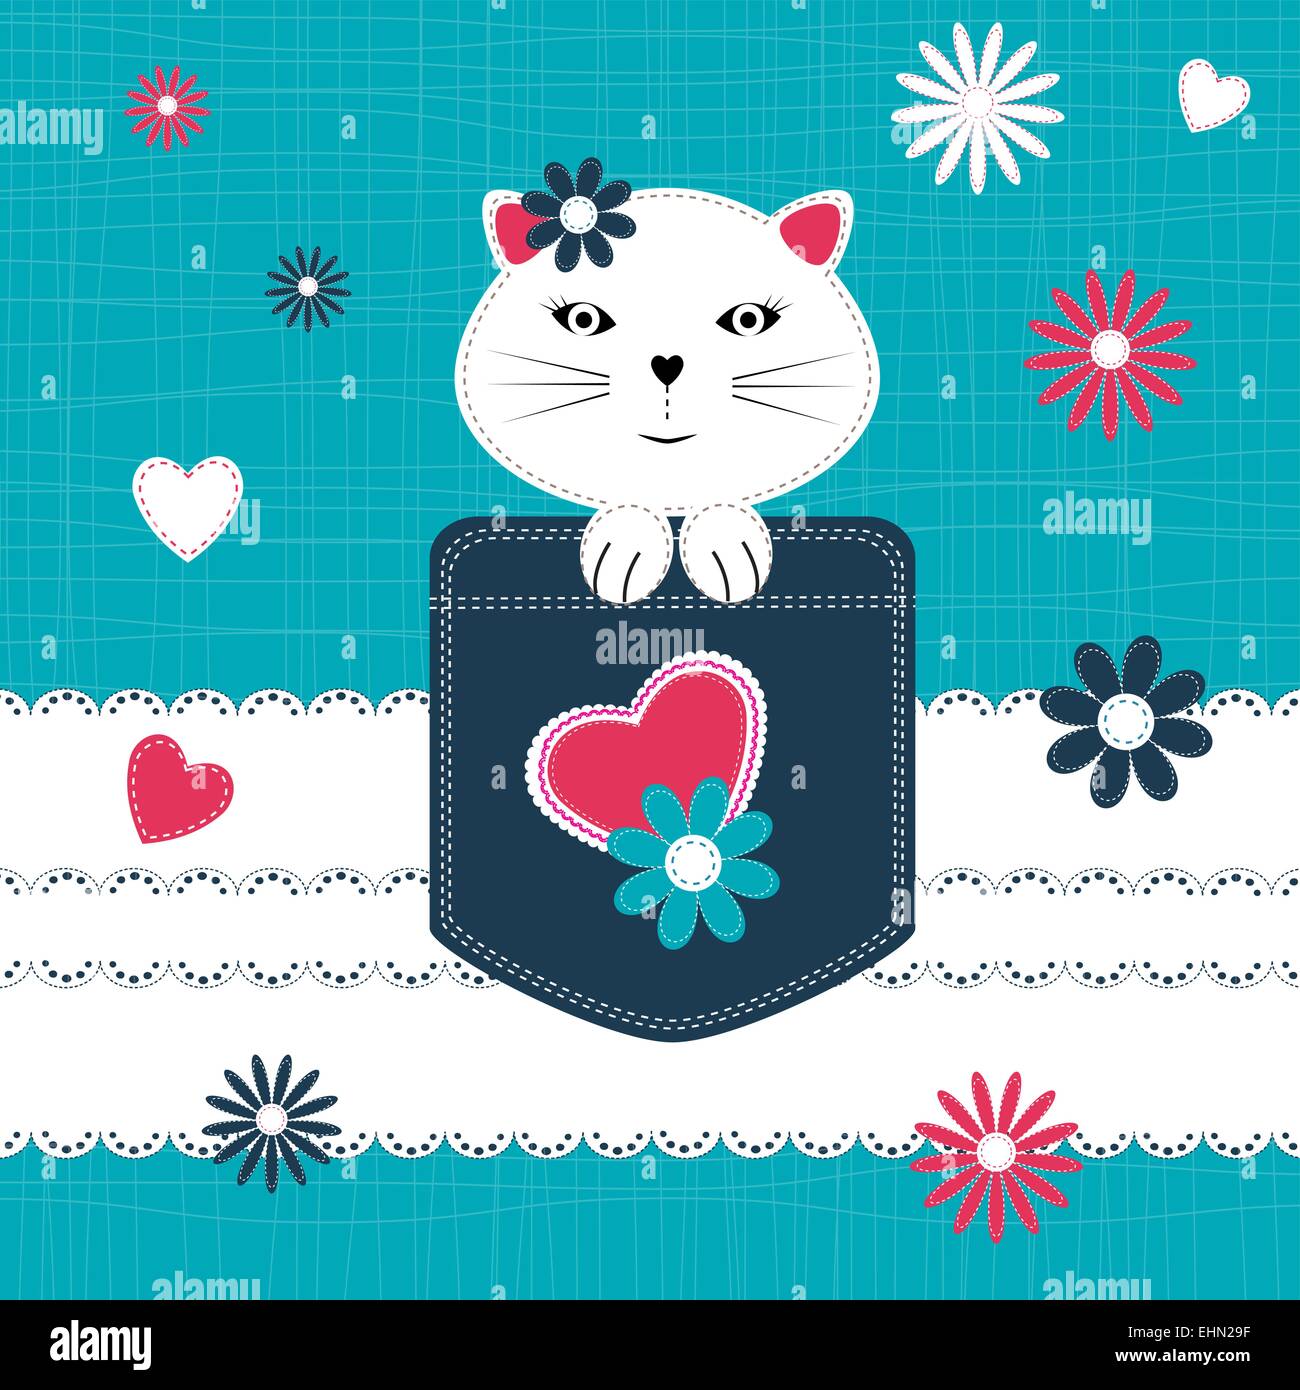 Cute and sweet baby card on birthday or shower Stock Vector